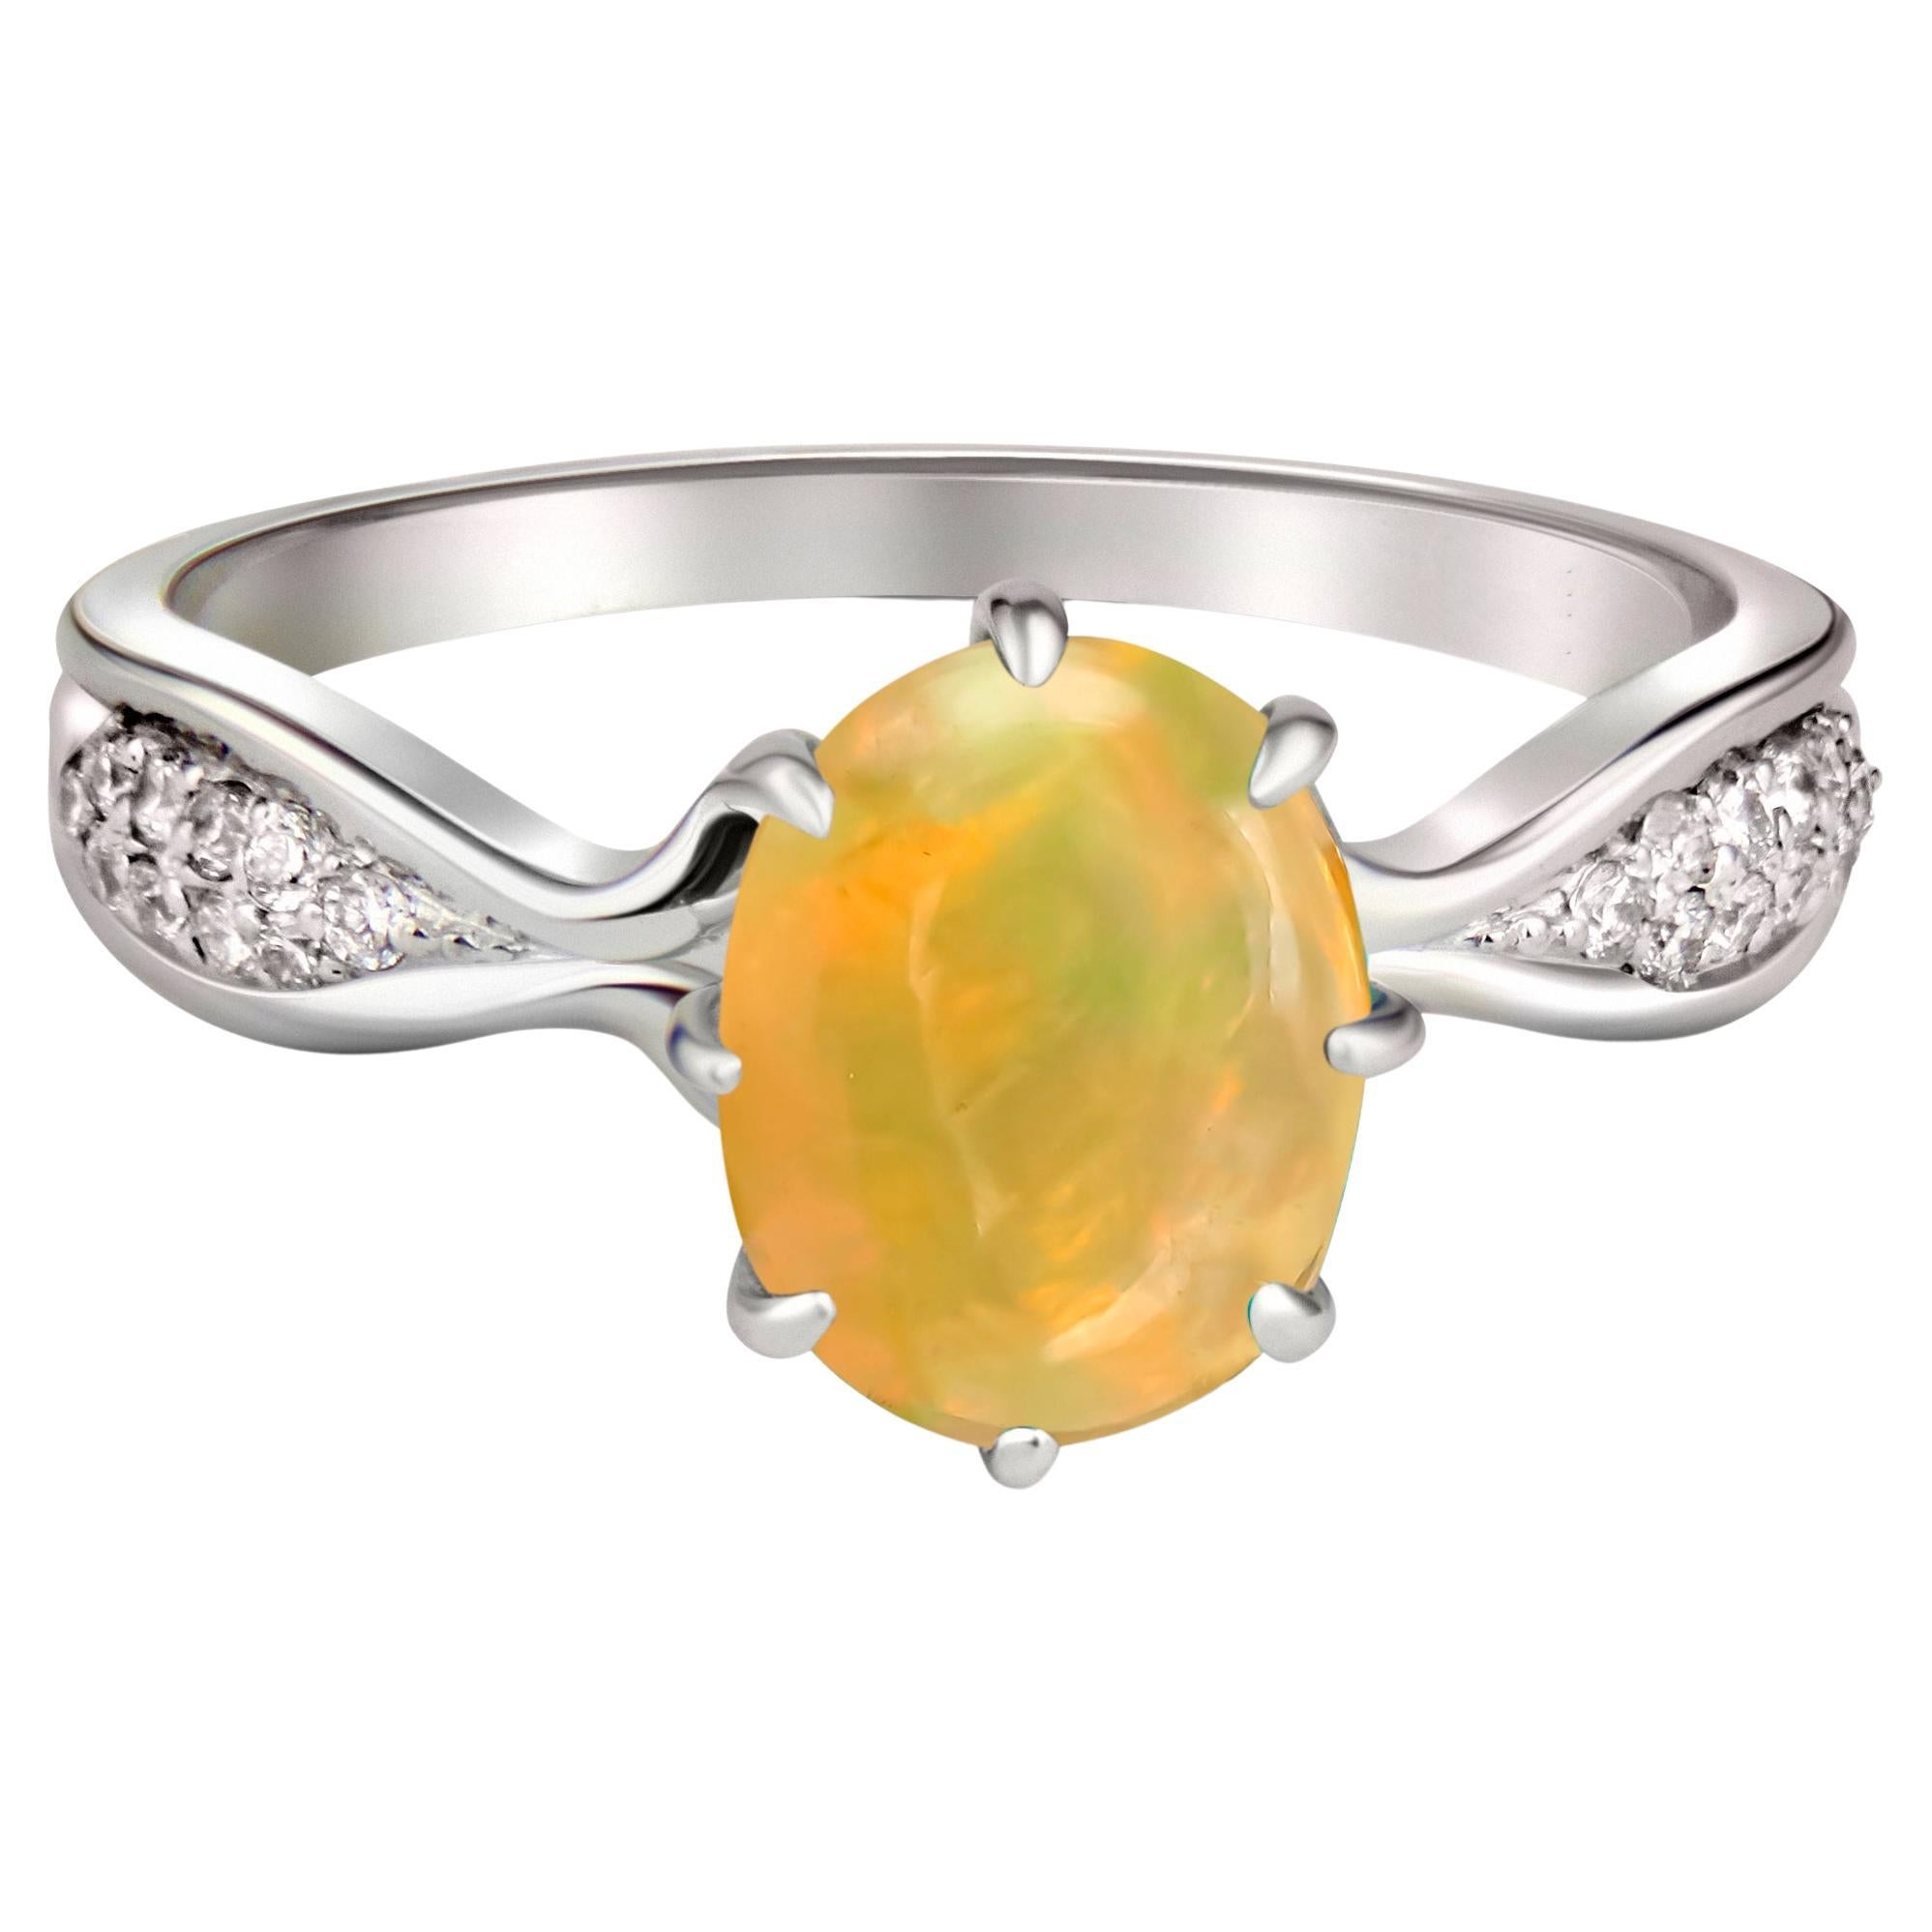 For Sale:  Opal 14k Gold Ring, Cabochon Opal Ring, Opal Gold Ring